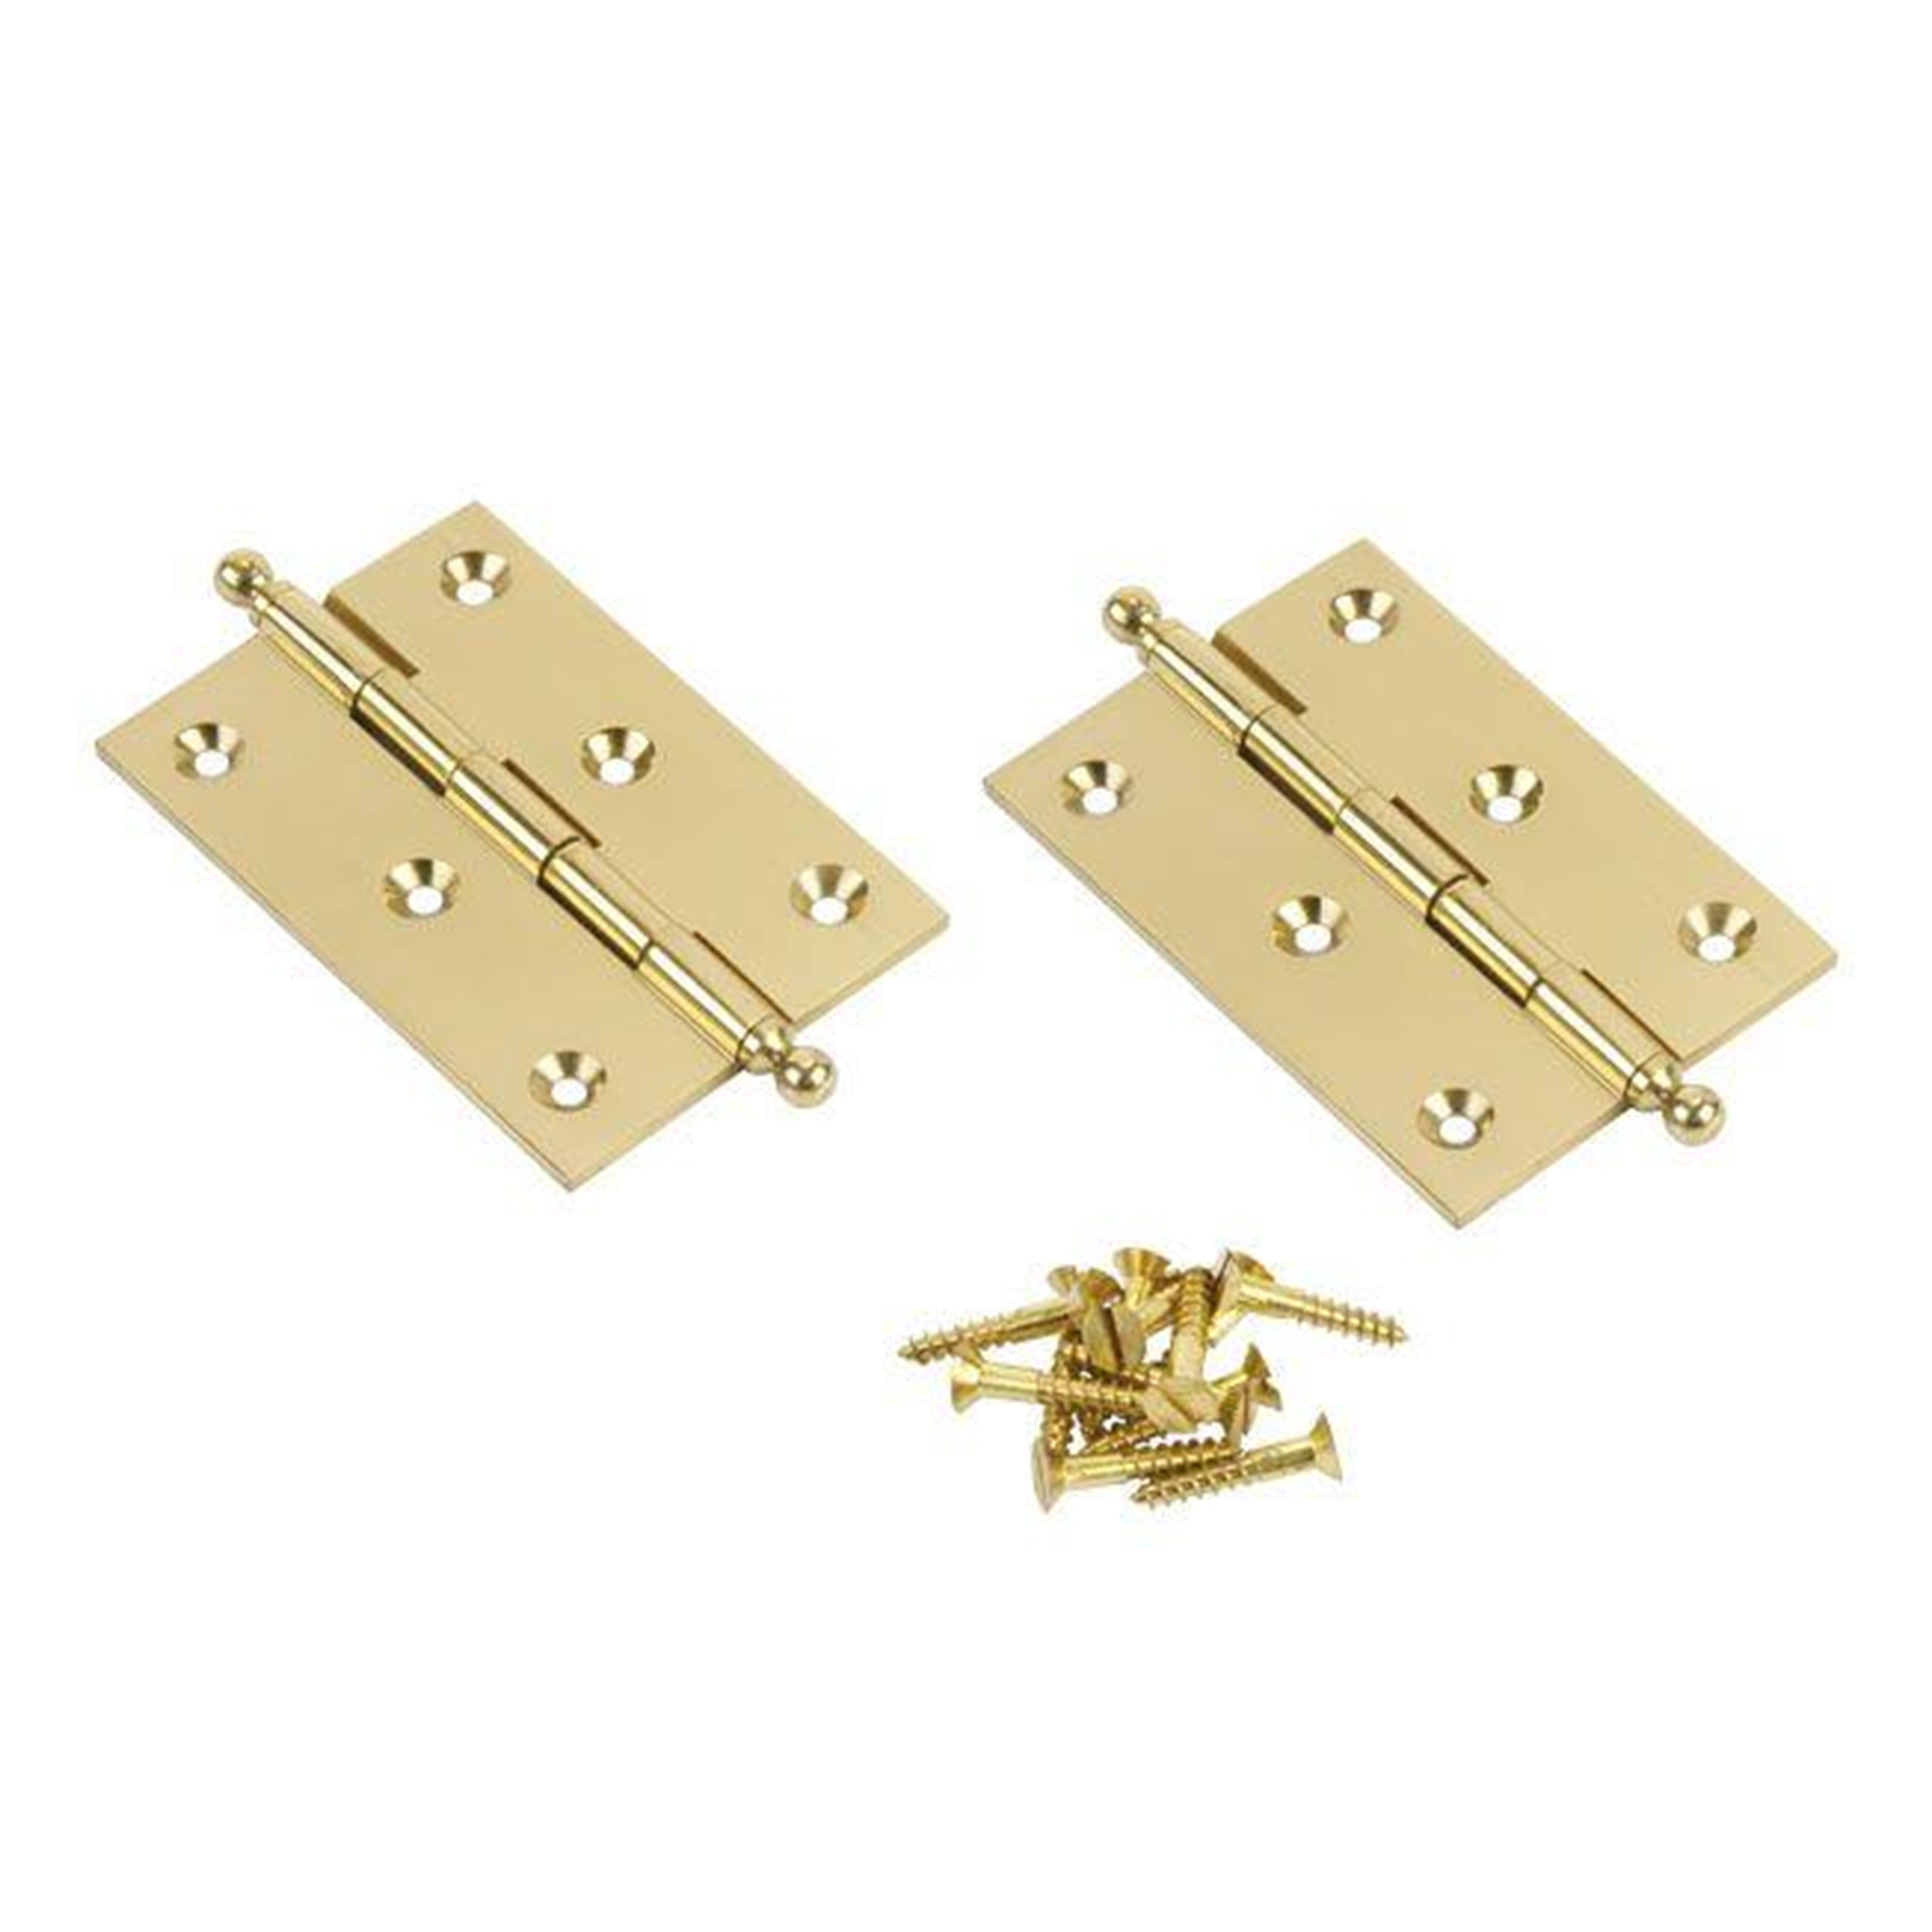 Ball Tip Cabinet Hinge, Polished Brass 2" X 1-1/2" X 1/16", Pair